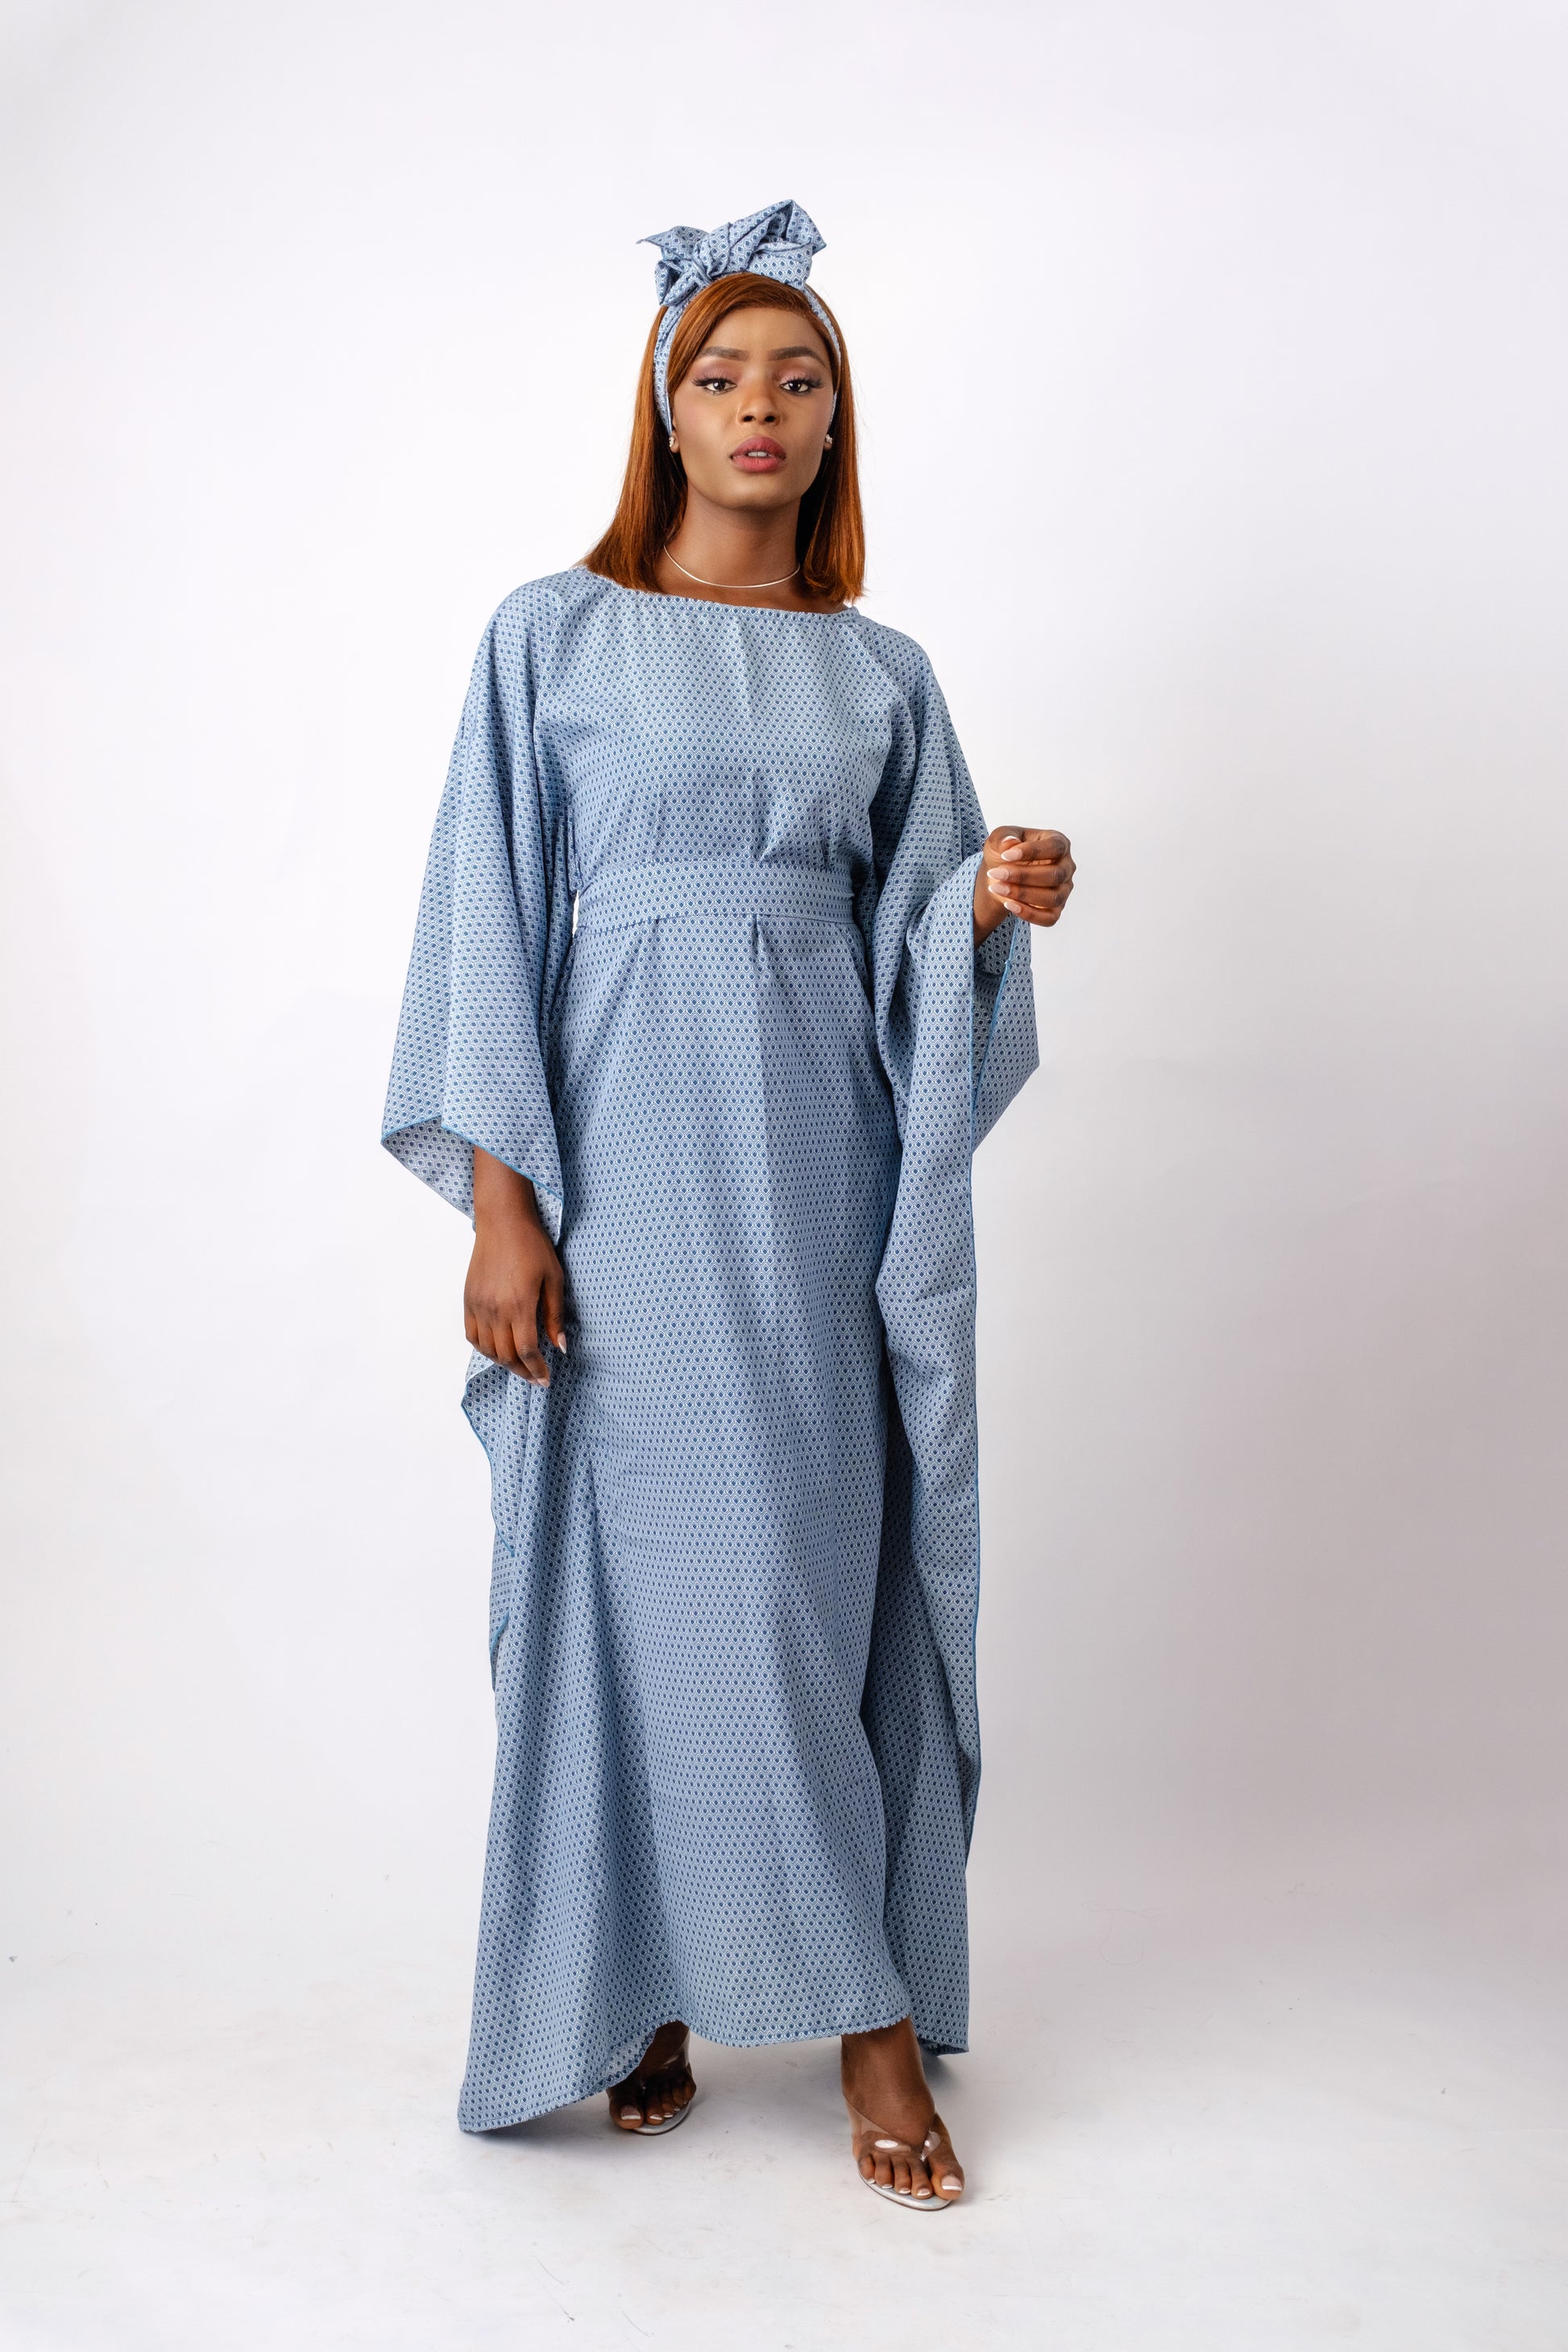 Blue & white long-sleeved, tight-fitting Maxi kaftan made with chiffon fabric 